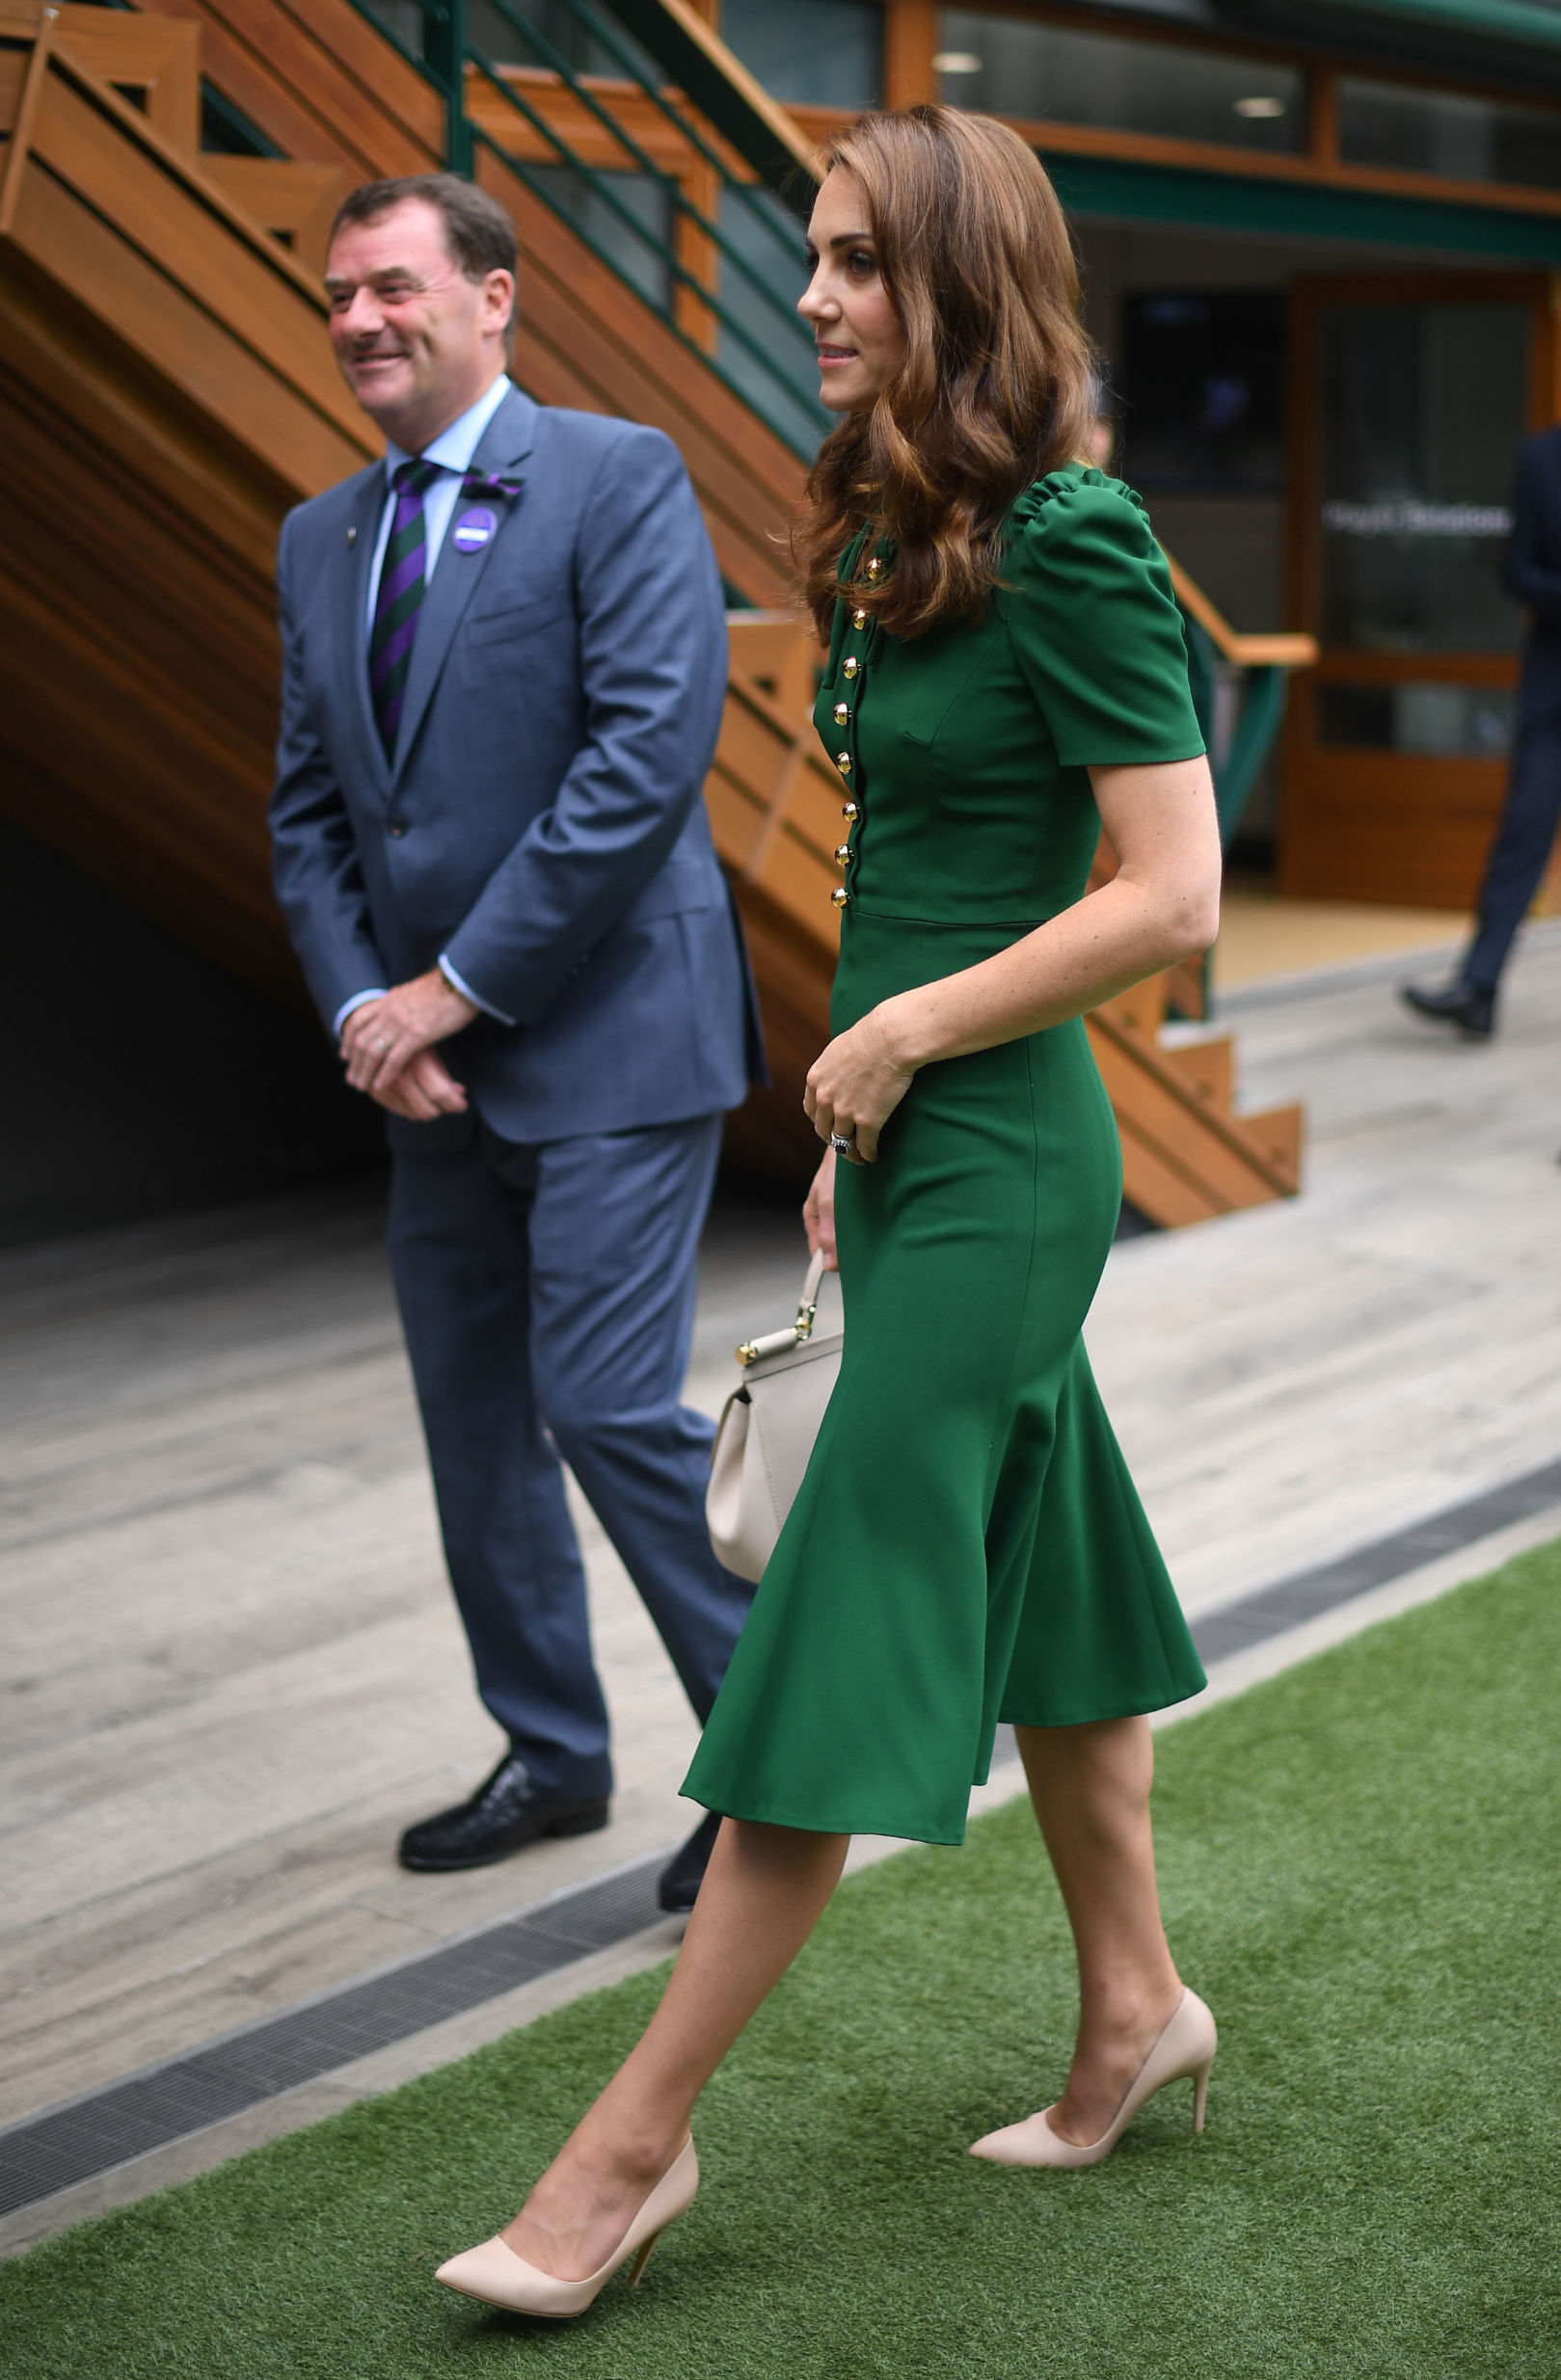 LONDON, ENGLAND - JULY 13: Catherine, Duchess of Cambridge arrives for the Women's Final on day twelve of the Wimbledon Championships at the All England Lawn Tennis and Croquet Club, Wimbledon on July 13, 2019 in London, England. (Photo by Victoria Jones - WPA Pool/Getty Images)